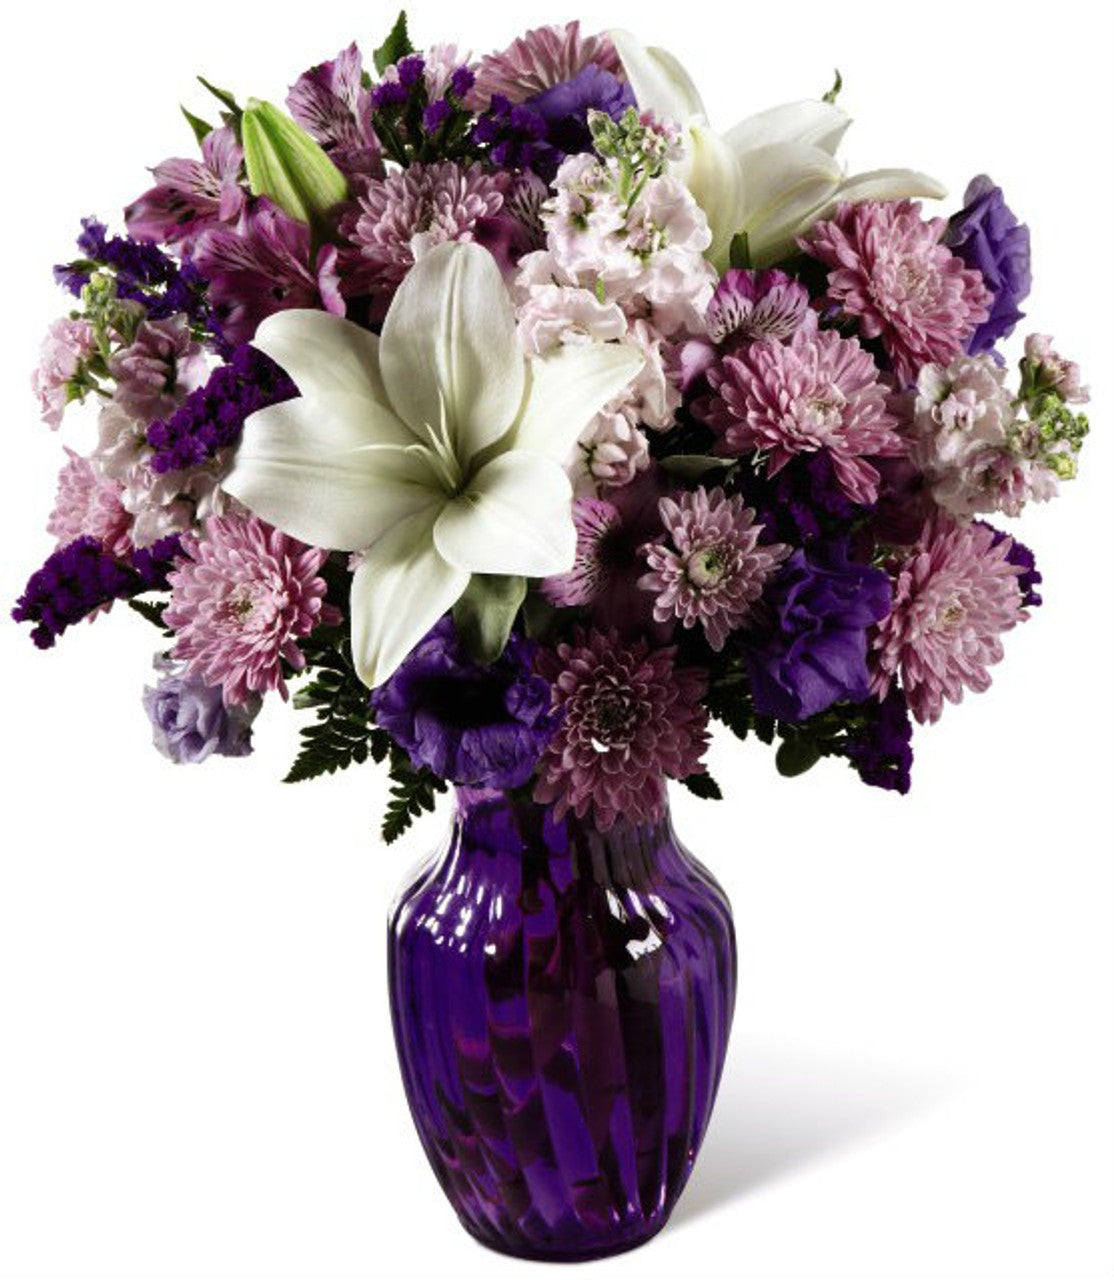 SHADES OF PURPLE BOUQUET